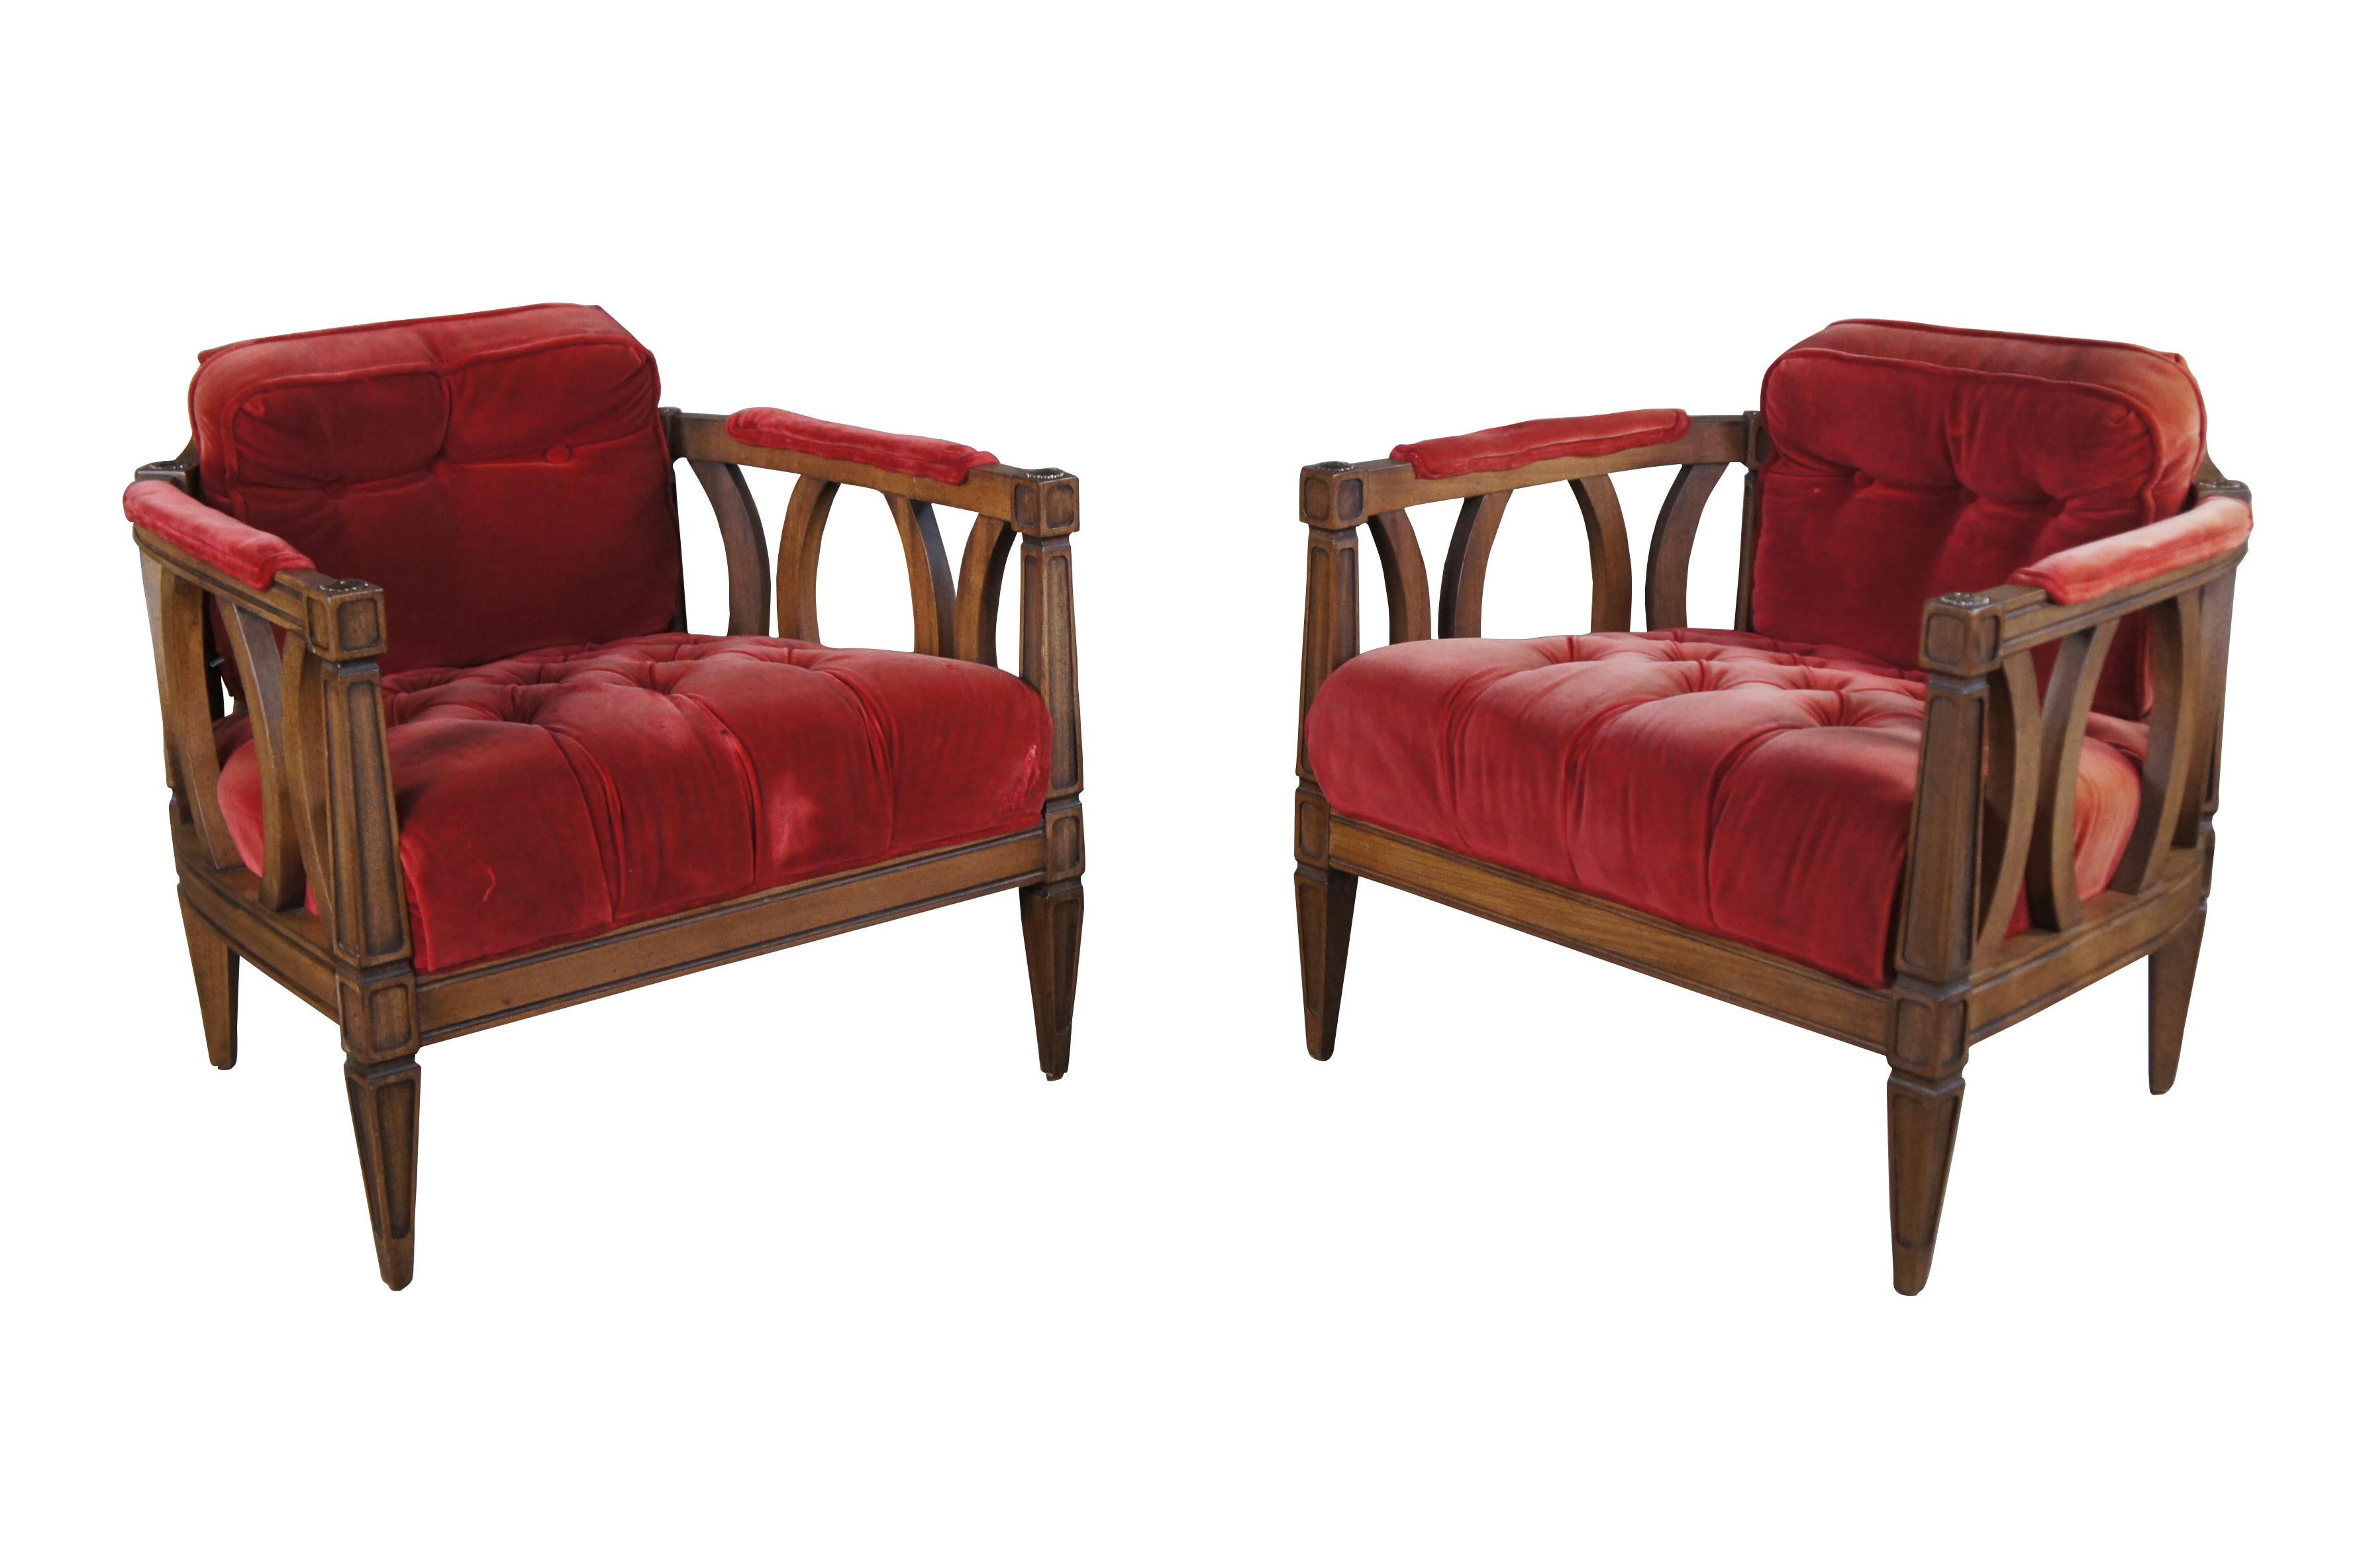 A pair of midcentury barrel back armchairs featuring a horse shoe shape with red velvet or velour tufted upholstery with high padded arms, and inset walnut panels with tapered legs.

.